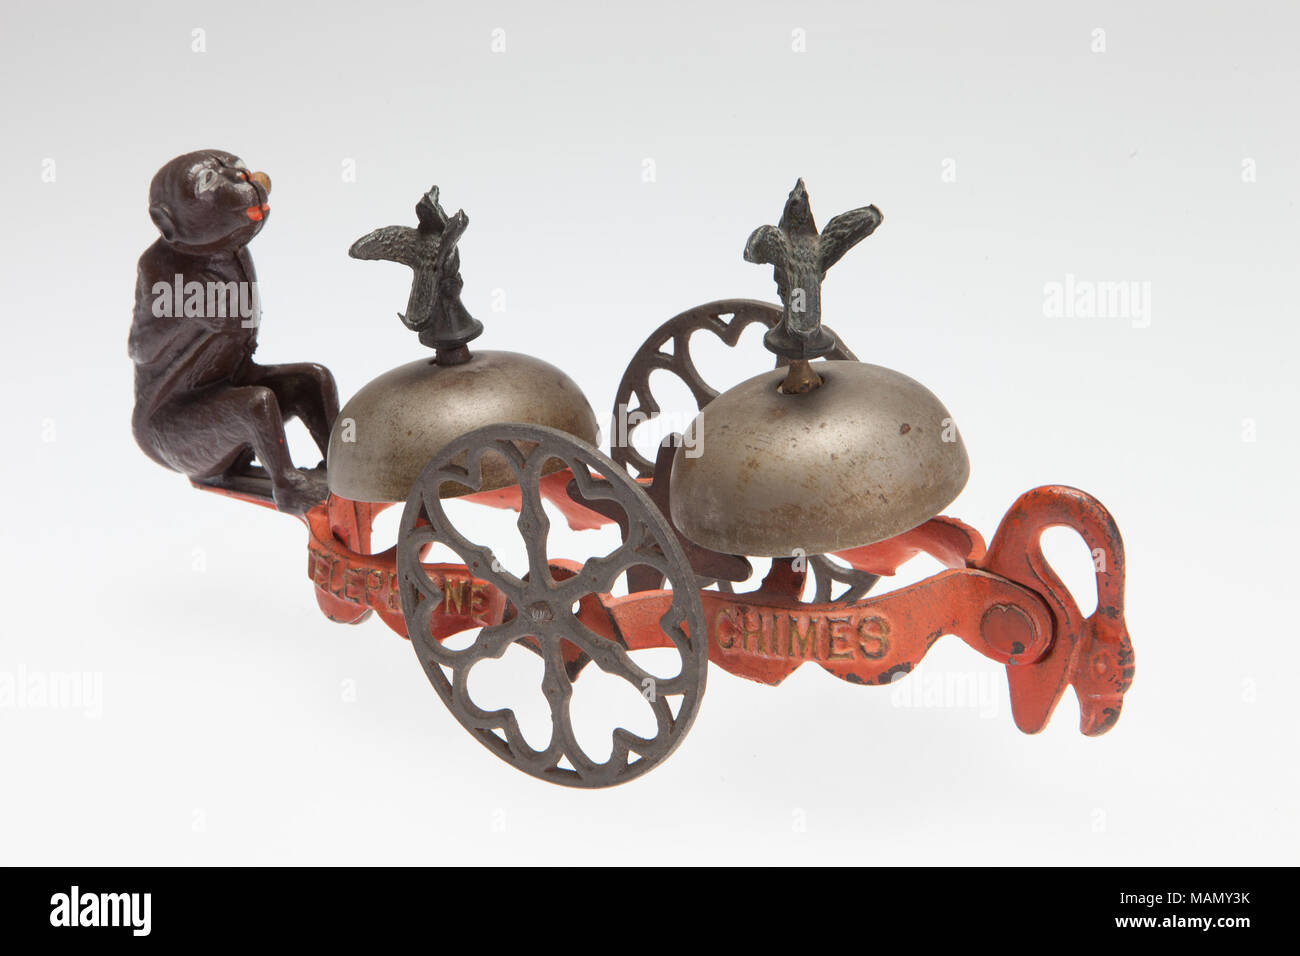 Hello Hello Telephone Chimes pull toy produced by the Gong Bell Manufacturing Company. The toy features a cast monkey and two ringing bells. Title: Hello Hello Telephone Chimes Bell Ringer Pull Toy  . between 1900 and 1920. Gong Bell Manufacturing Company Stock Photo